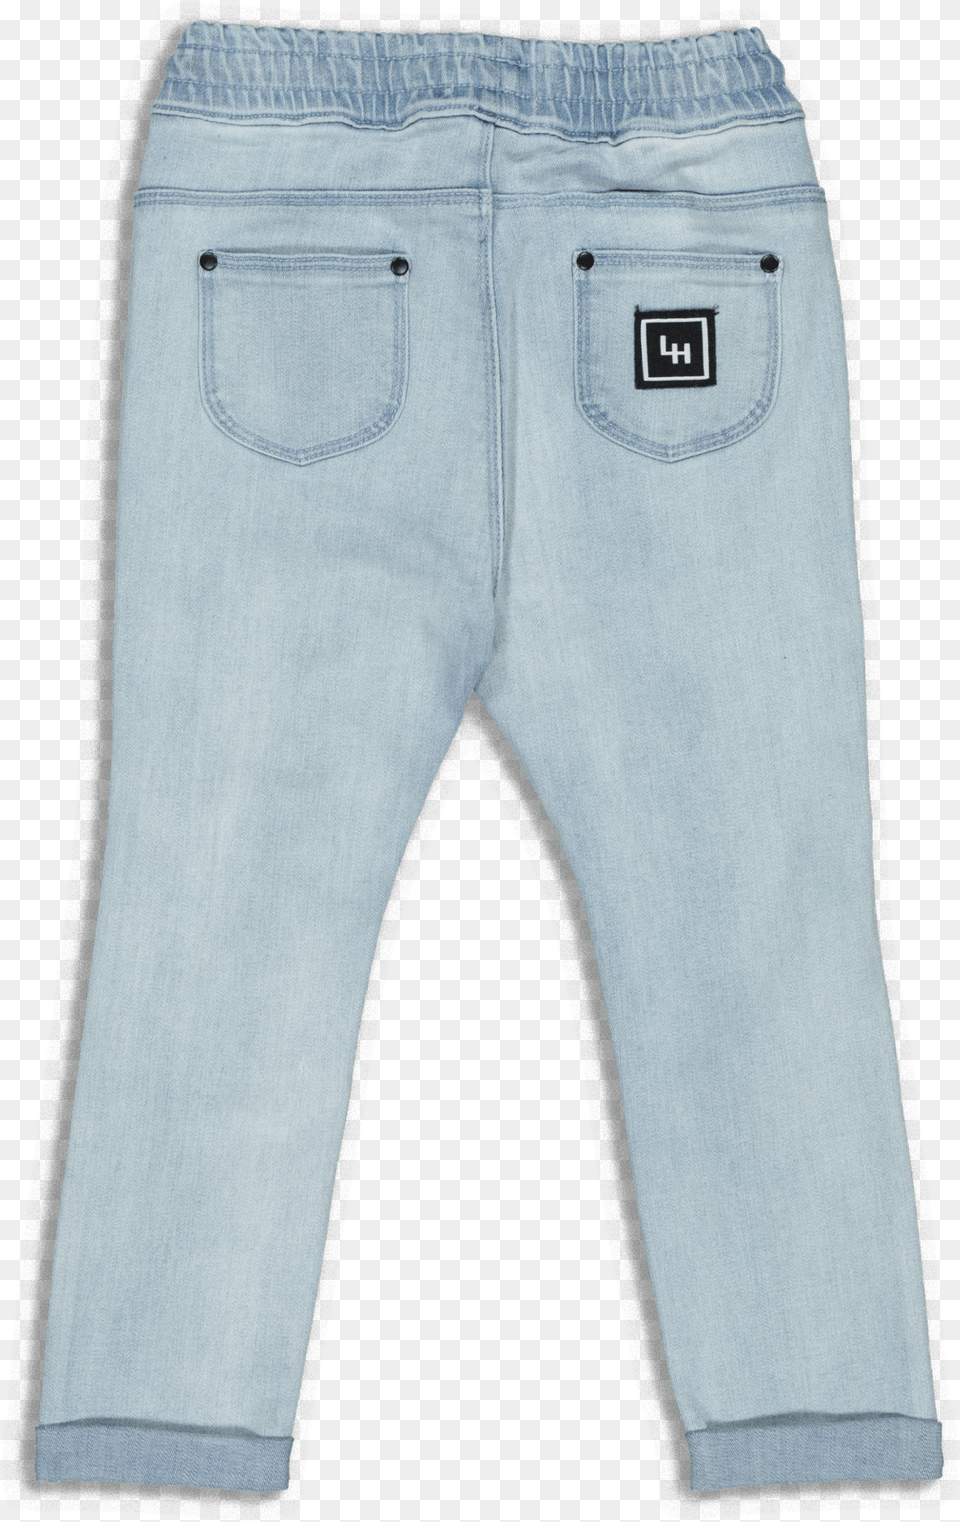 Pocket, Clothing, Jeans, Pants Free Png